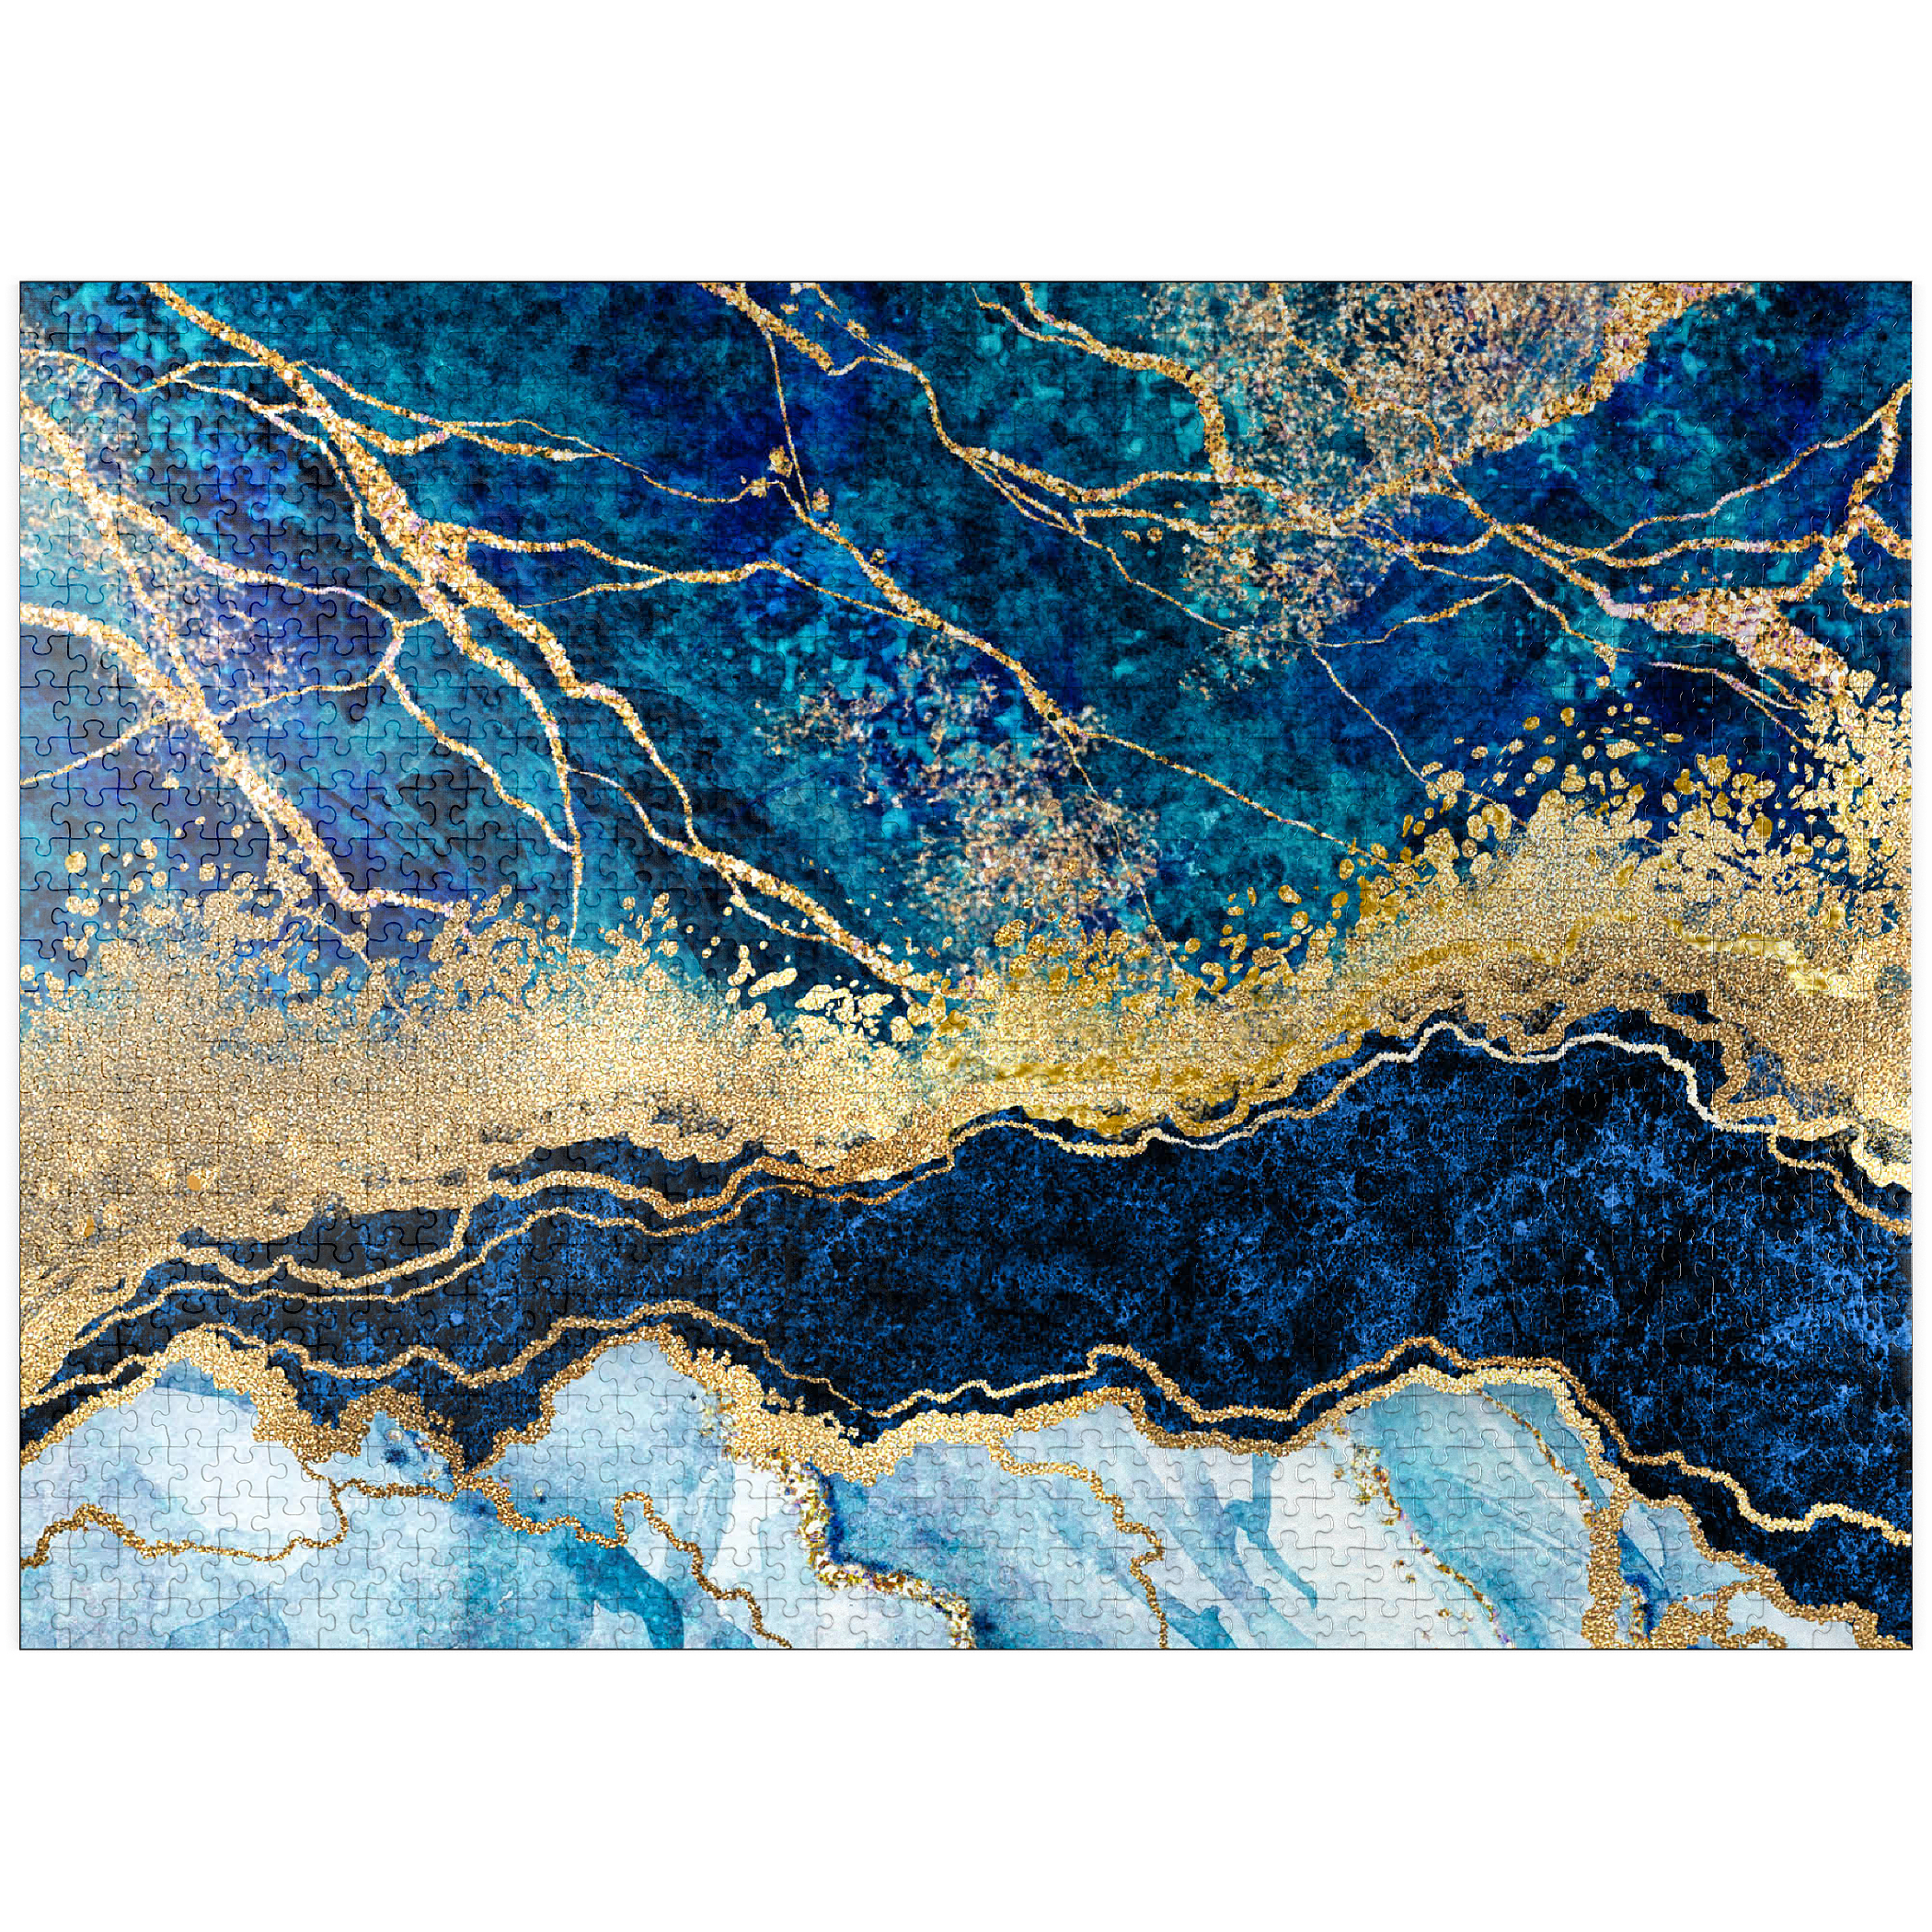 Abstract Background, Blue Marble, Fake Stone Texture, Liquid Paint, Gold  Foil and Glitter, Painted Artificial Marbled, Marbling Stock Image - Image  of gold, marbling: 156592337